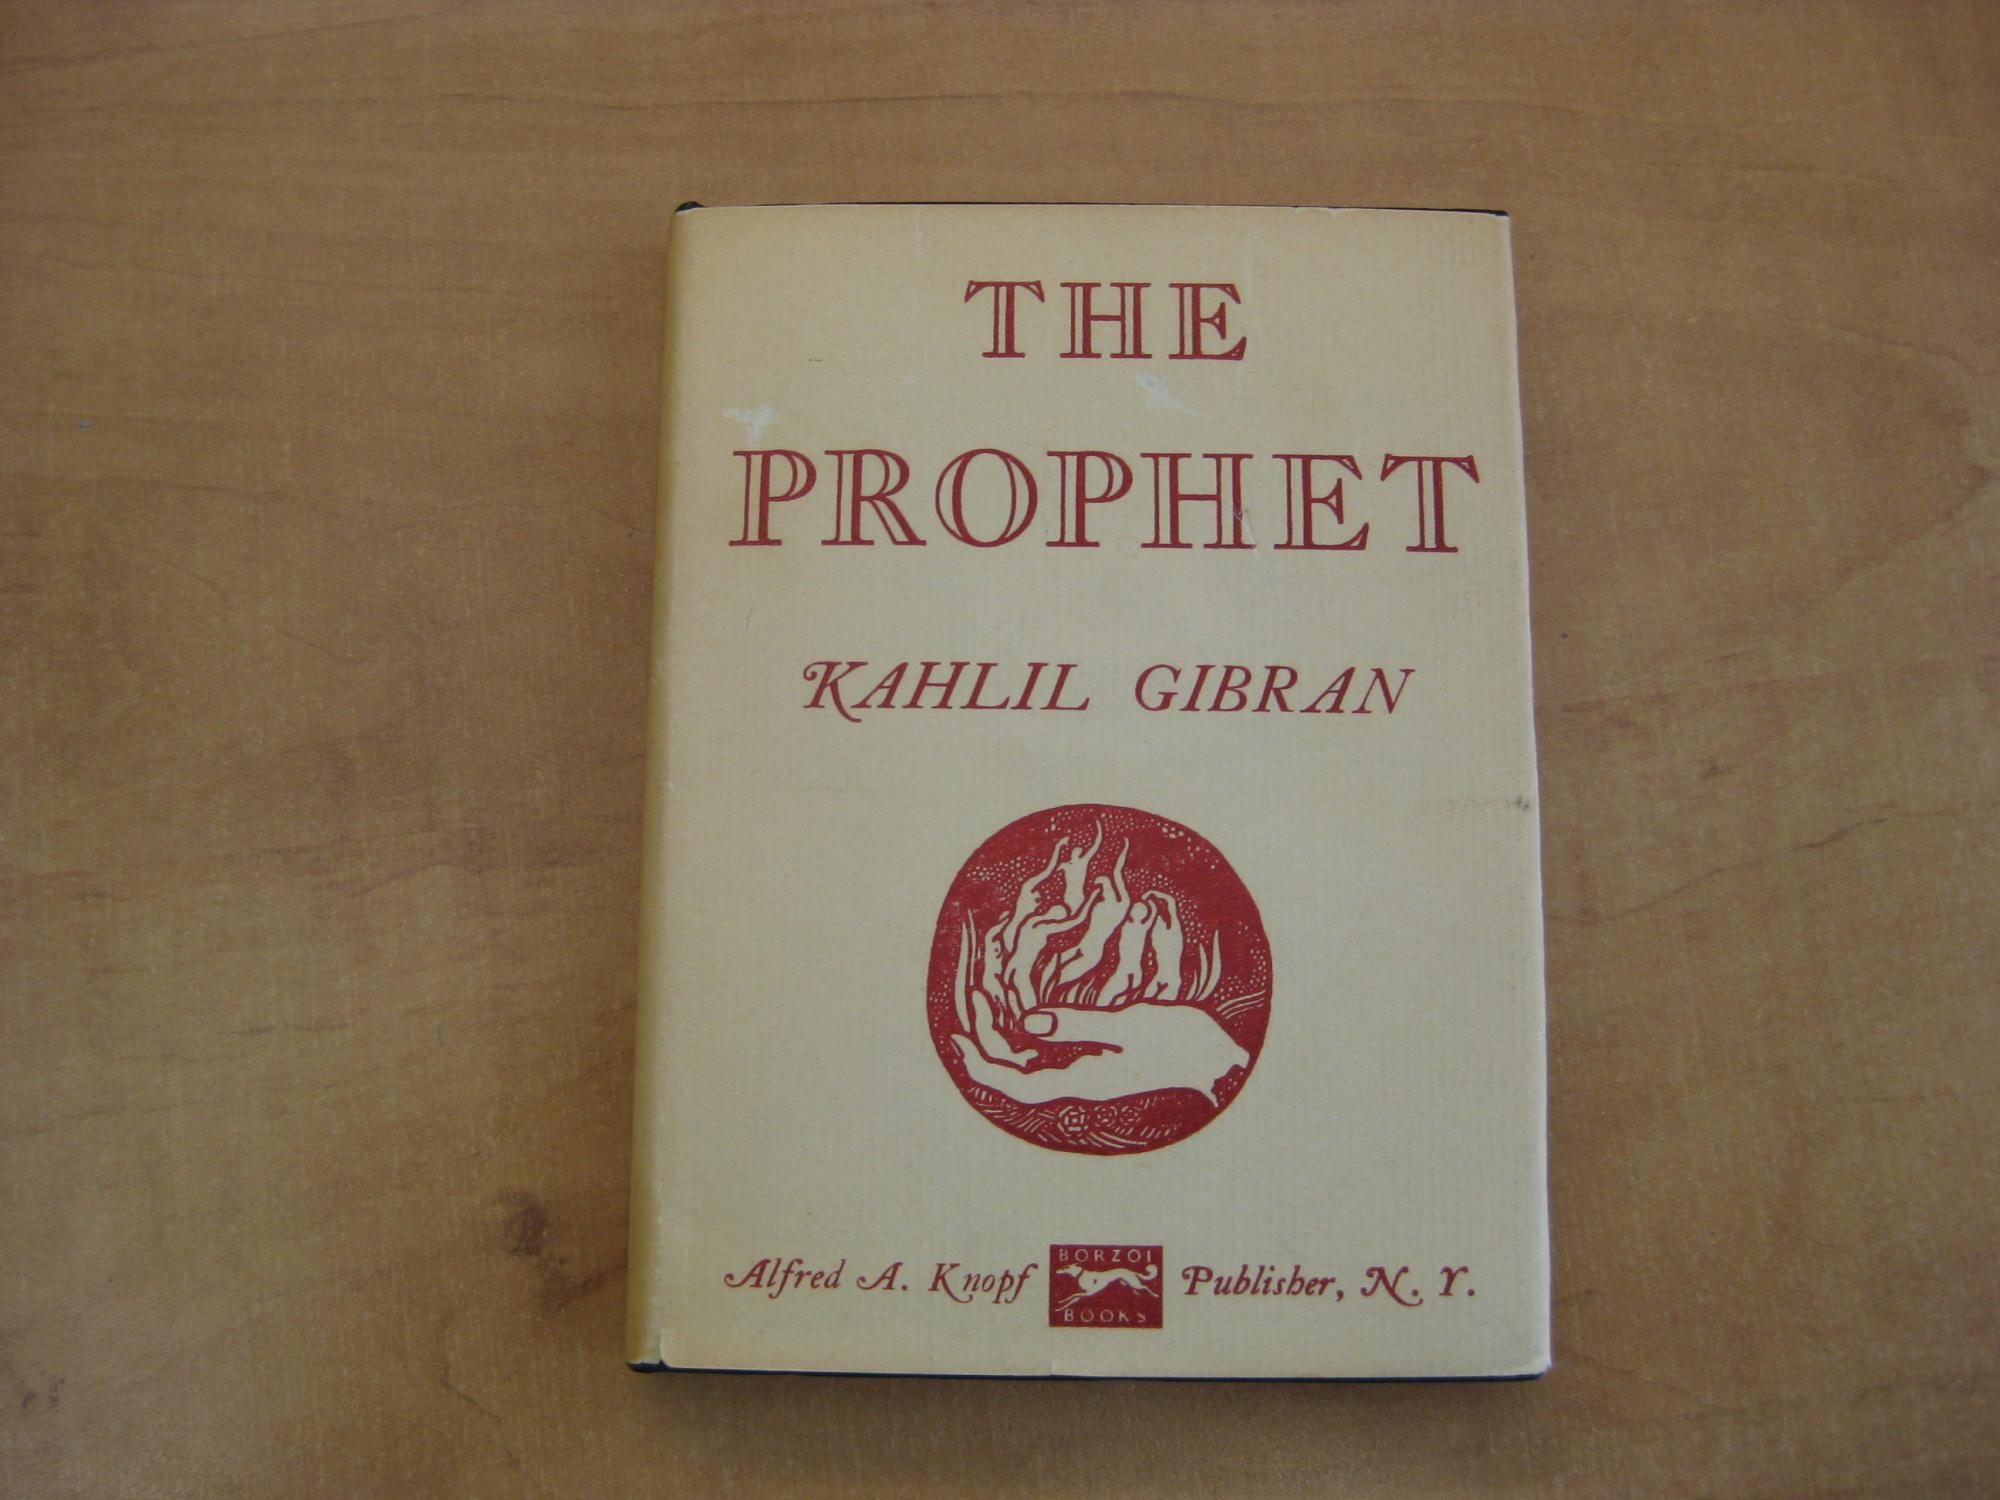 The Prophet By Kahlil Gibran Very Good Plus Hardcover 1961 By The Lake Books